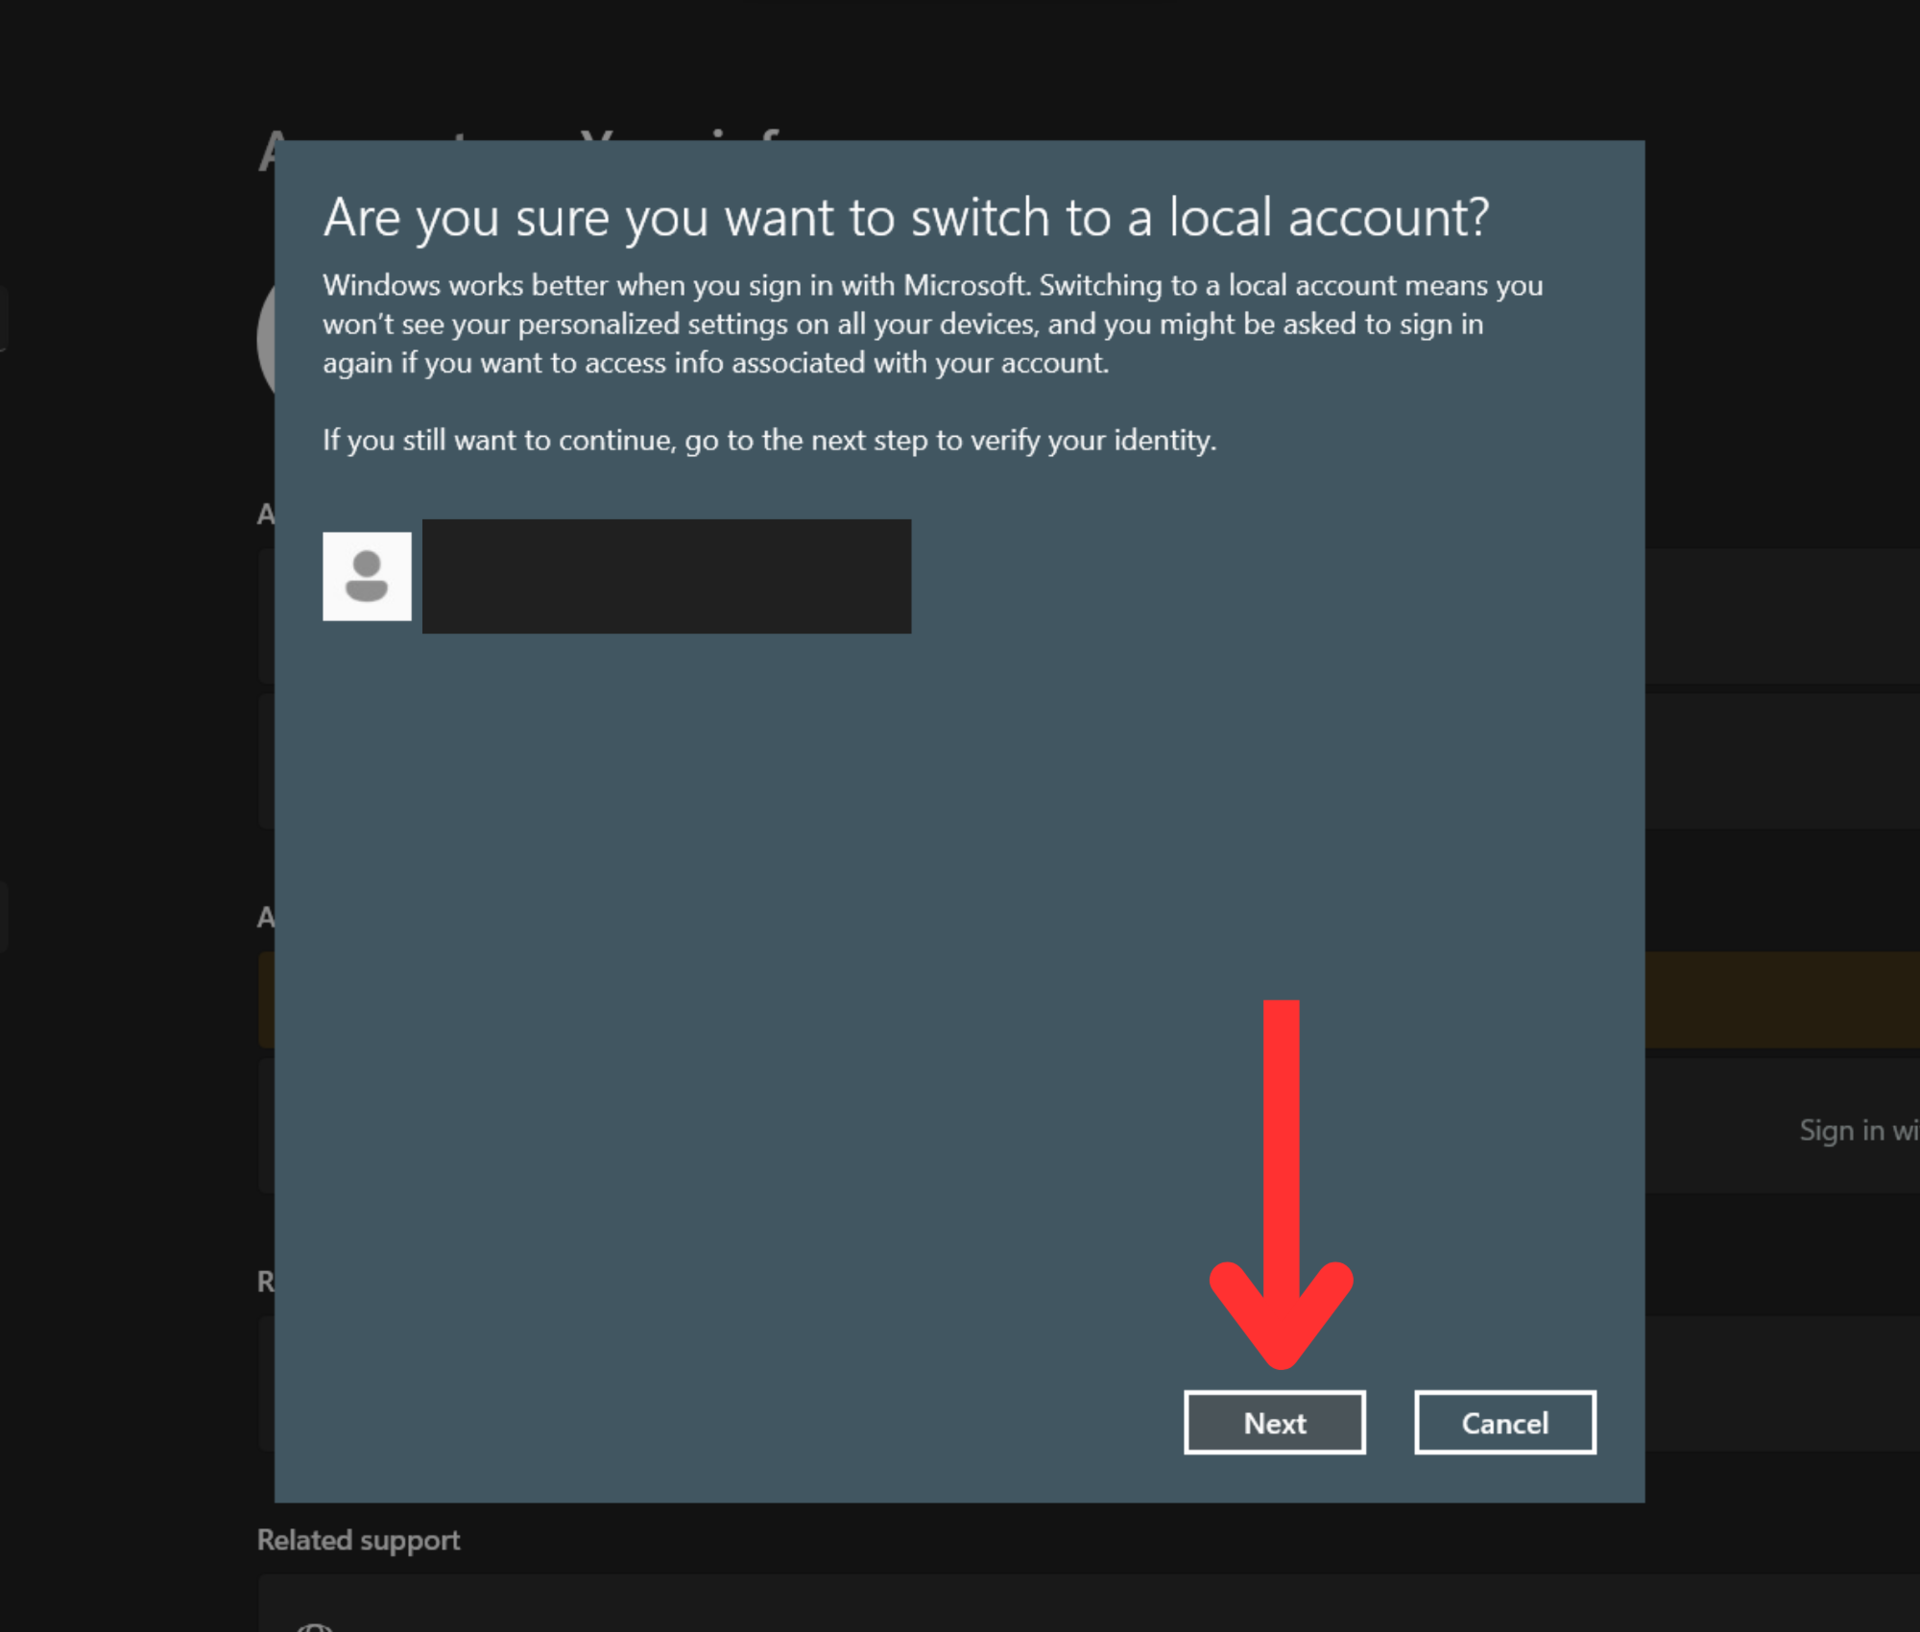 windows sign in with local email verify next button